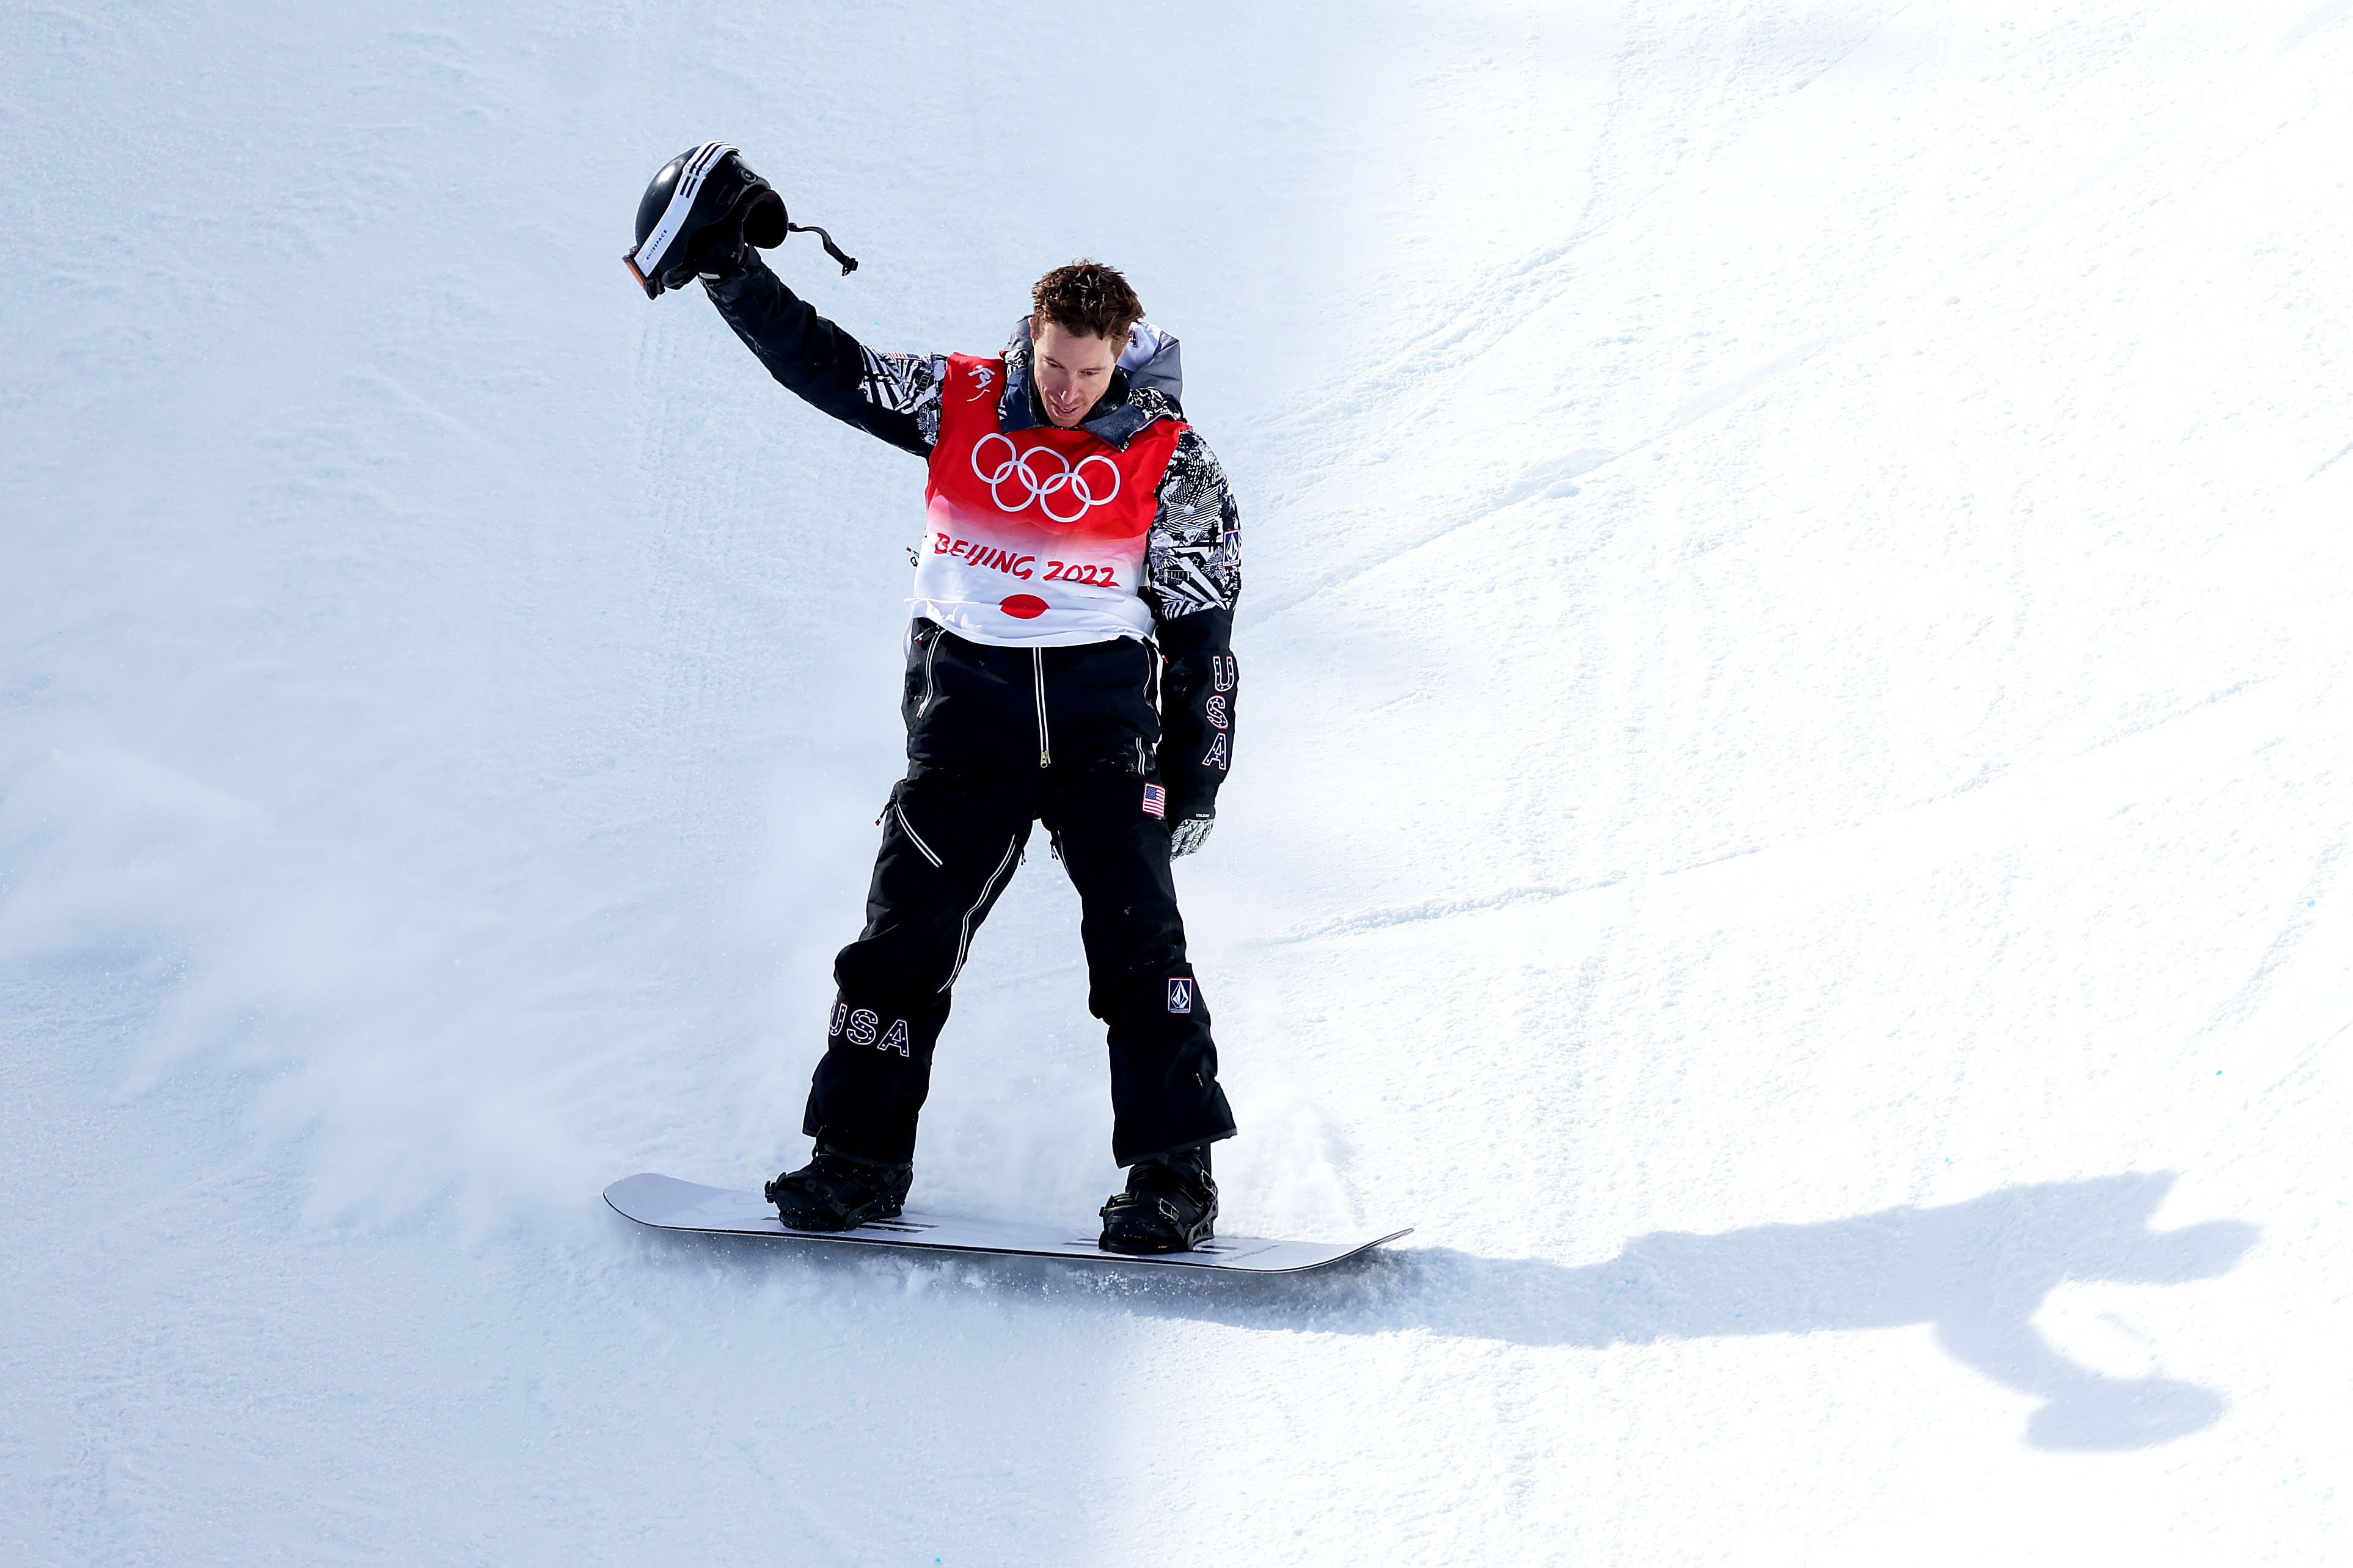 Shaun White Confirms 2022 Beijing Olympics Are His Last Winter